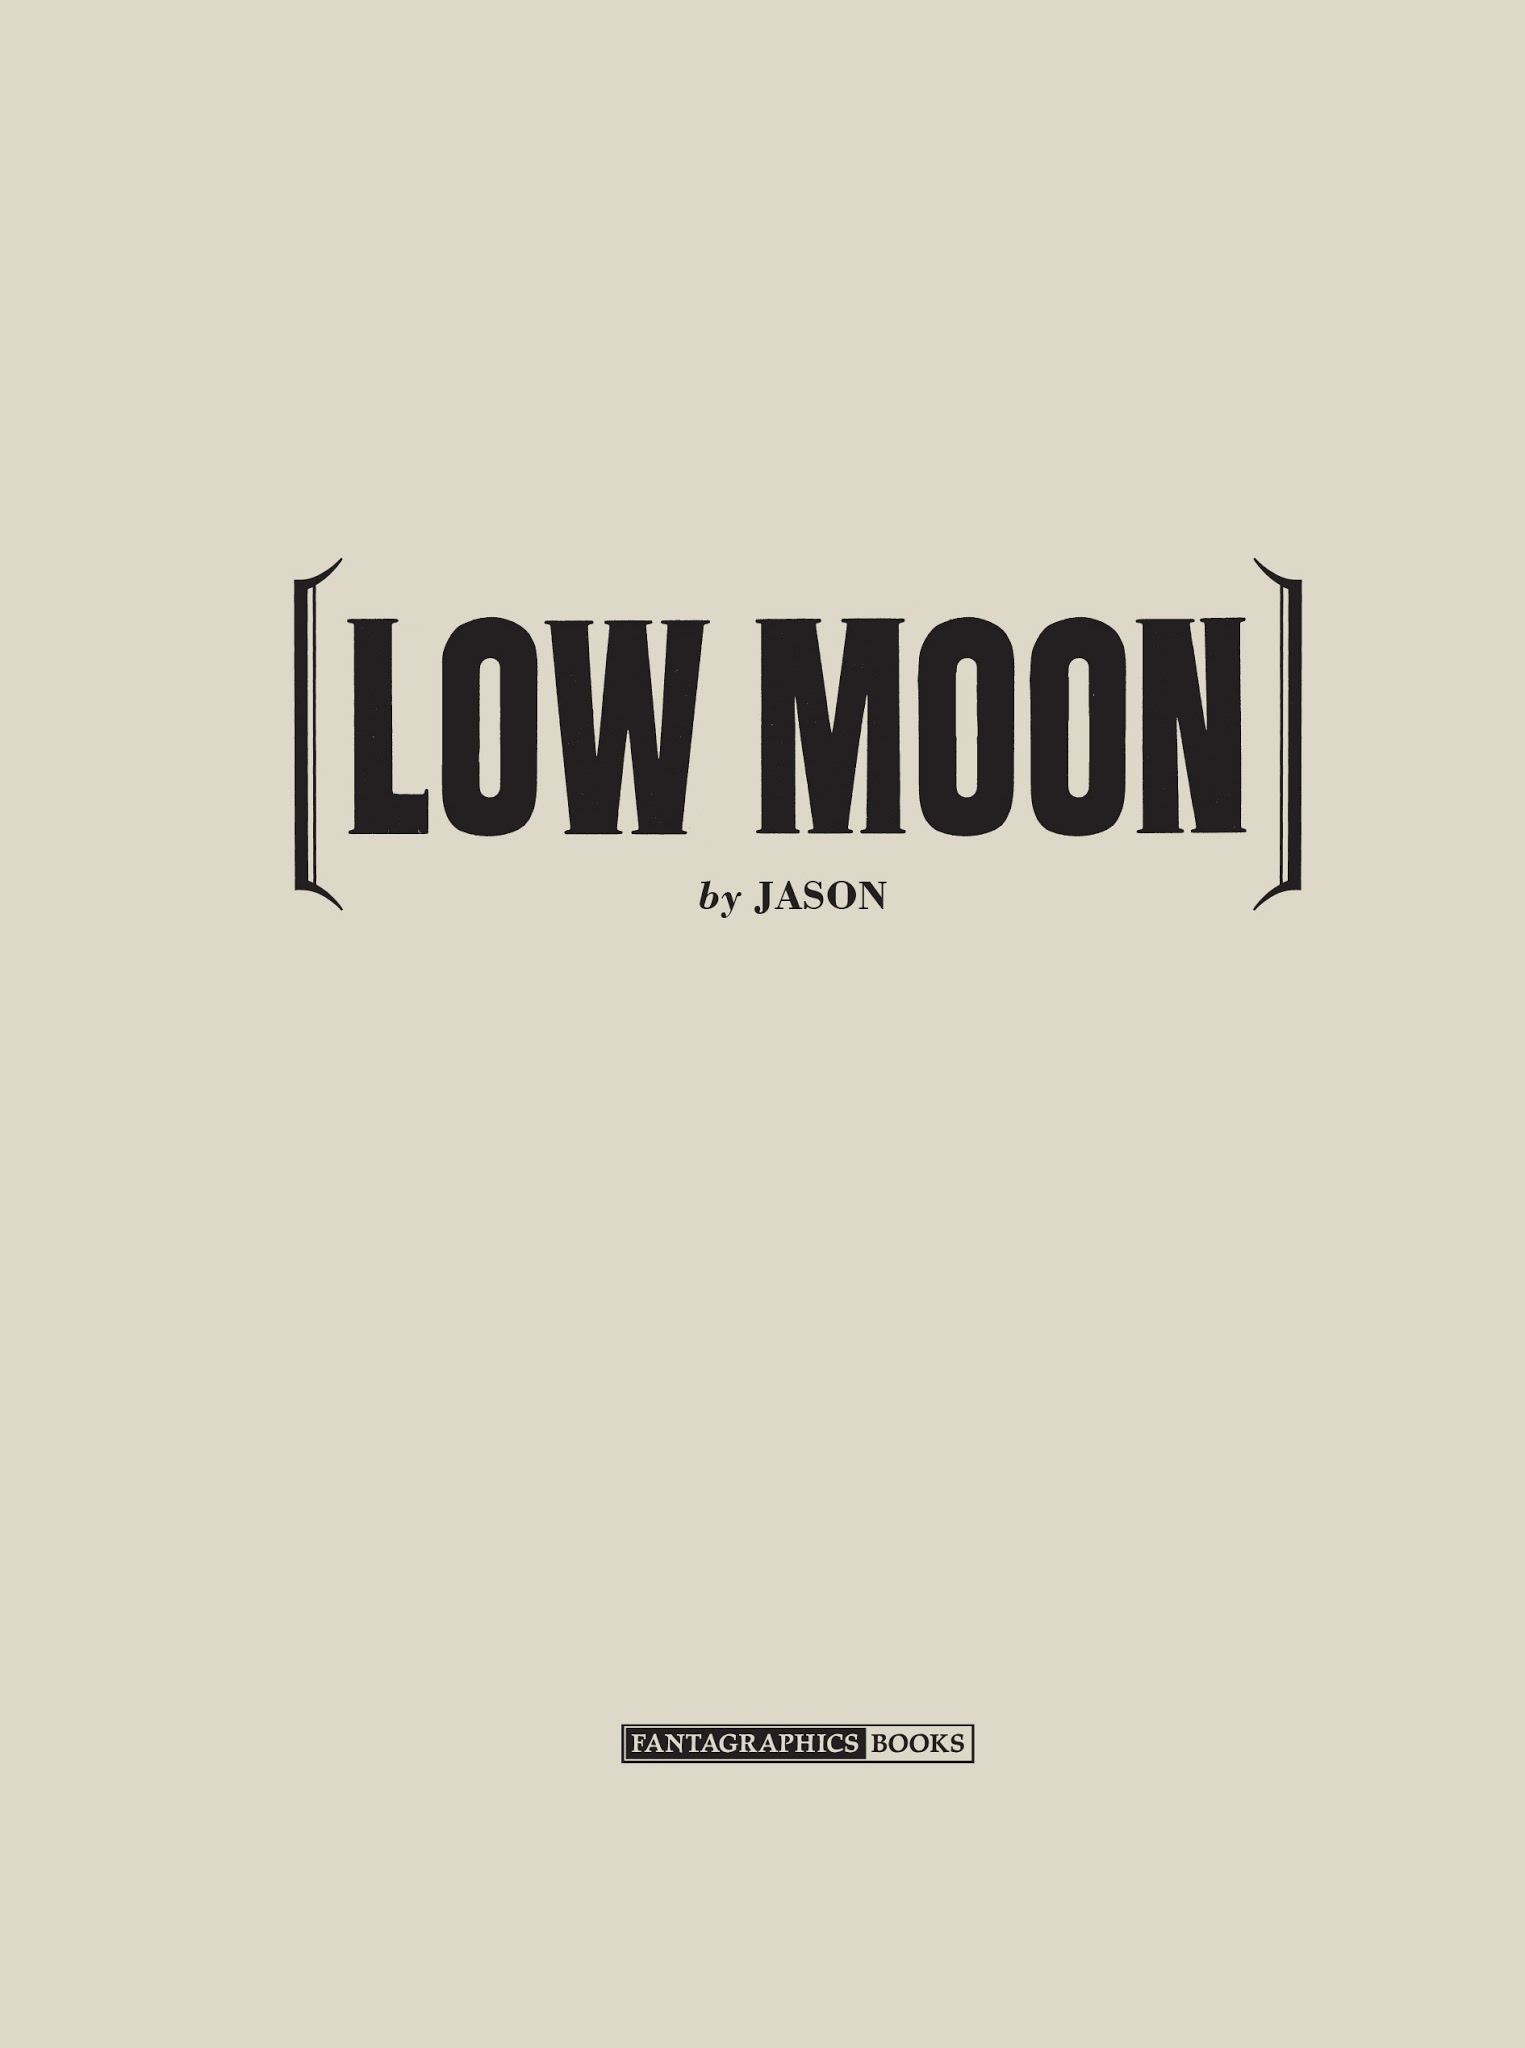 Read online Low Moon comic -  Issue # TPB - 4